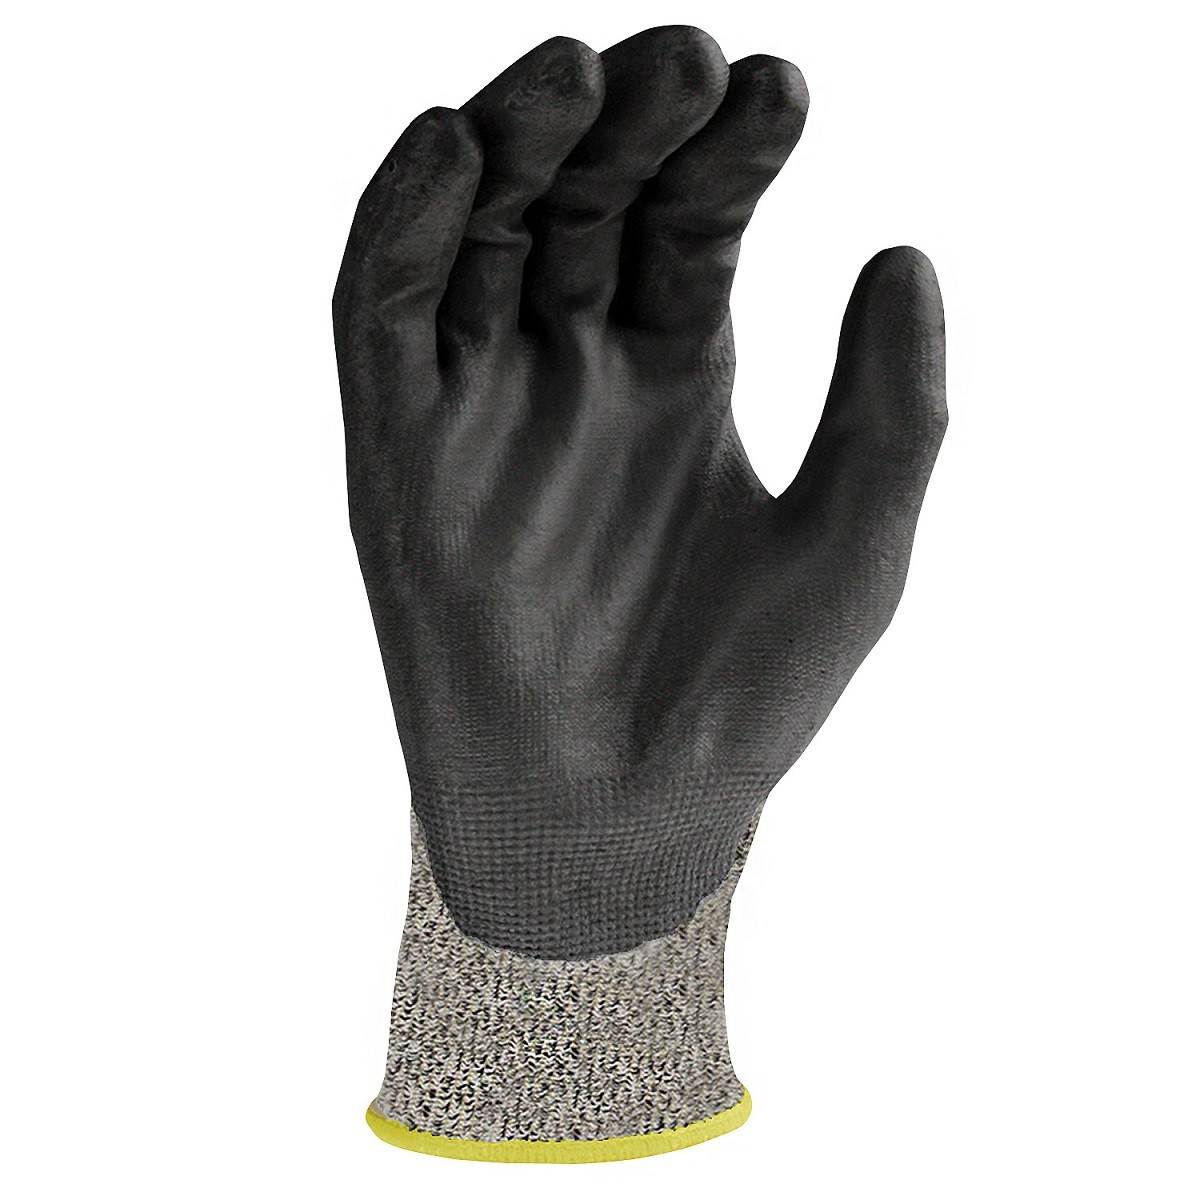 Radians RWG604 Cut Protection Level A4 Cold Weather Coated Glove